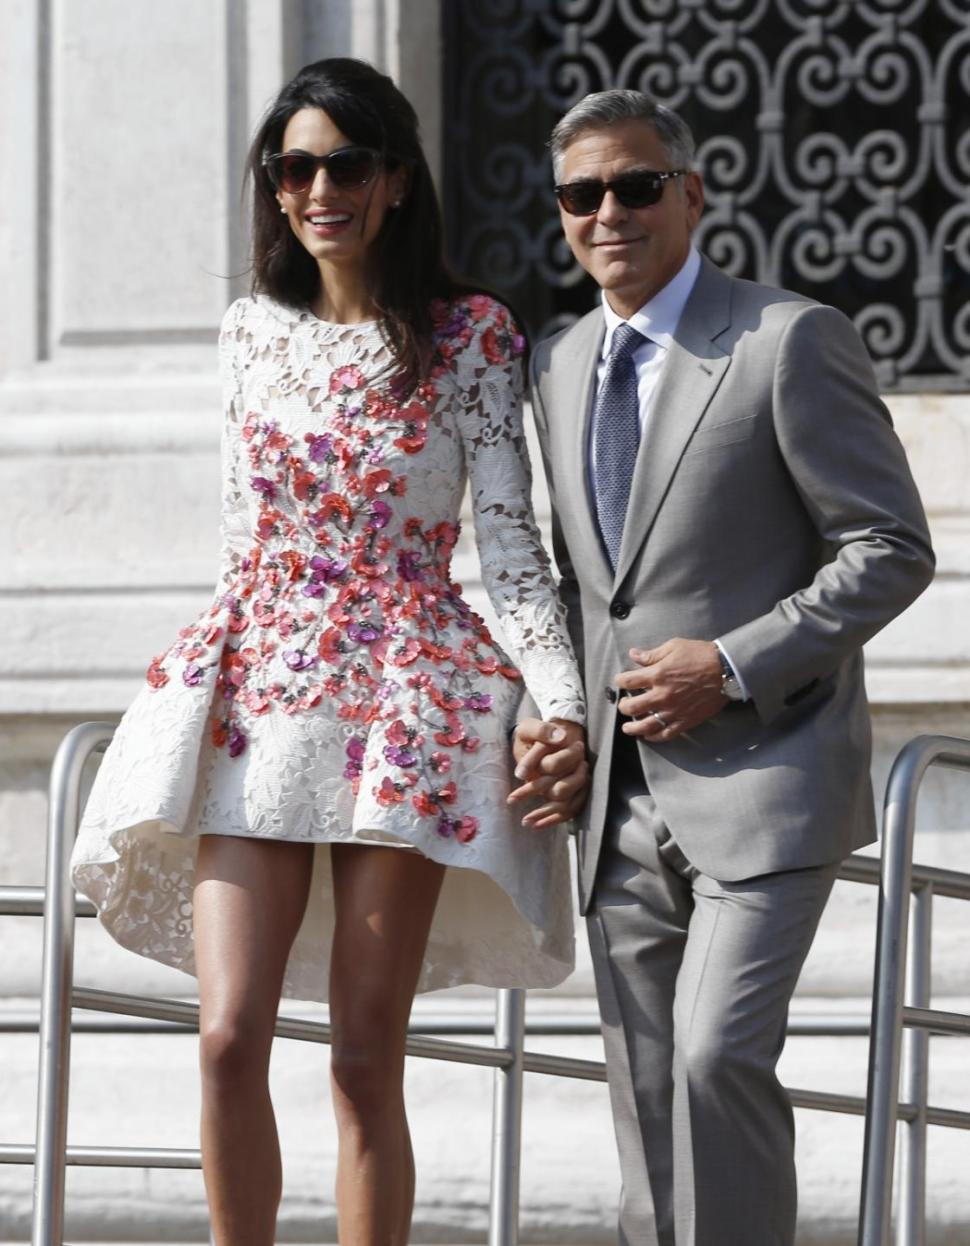 George Clooney and wife Amal leave luxury Hotel in Venice on Sunday, Sept. 28.